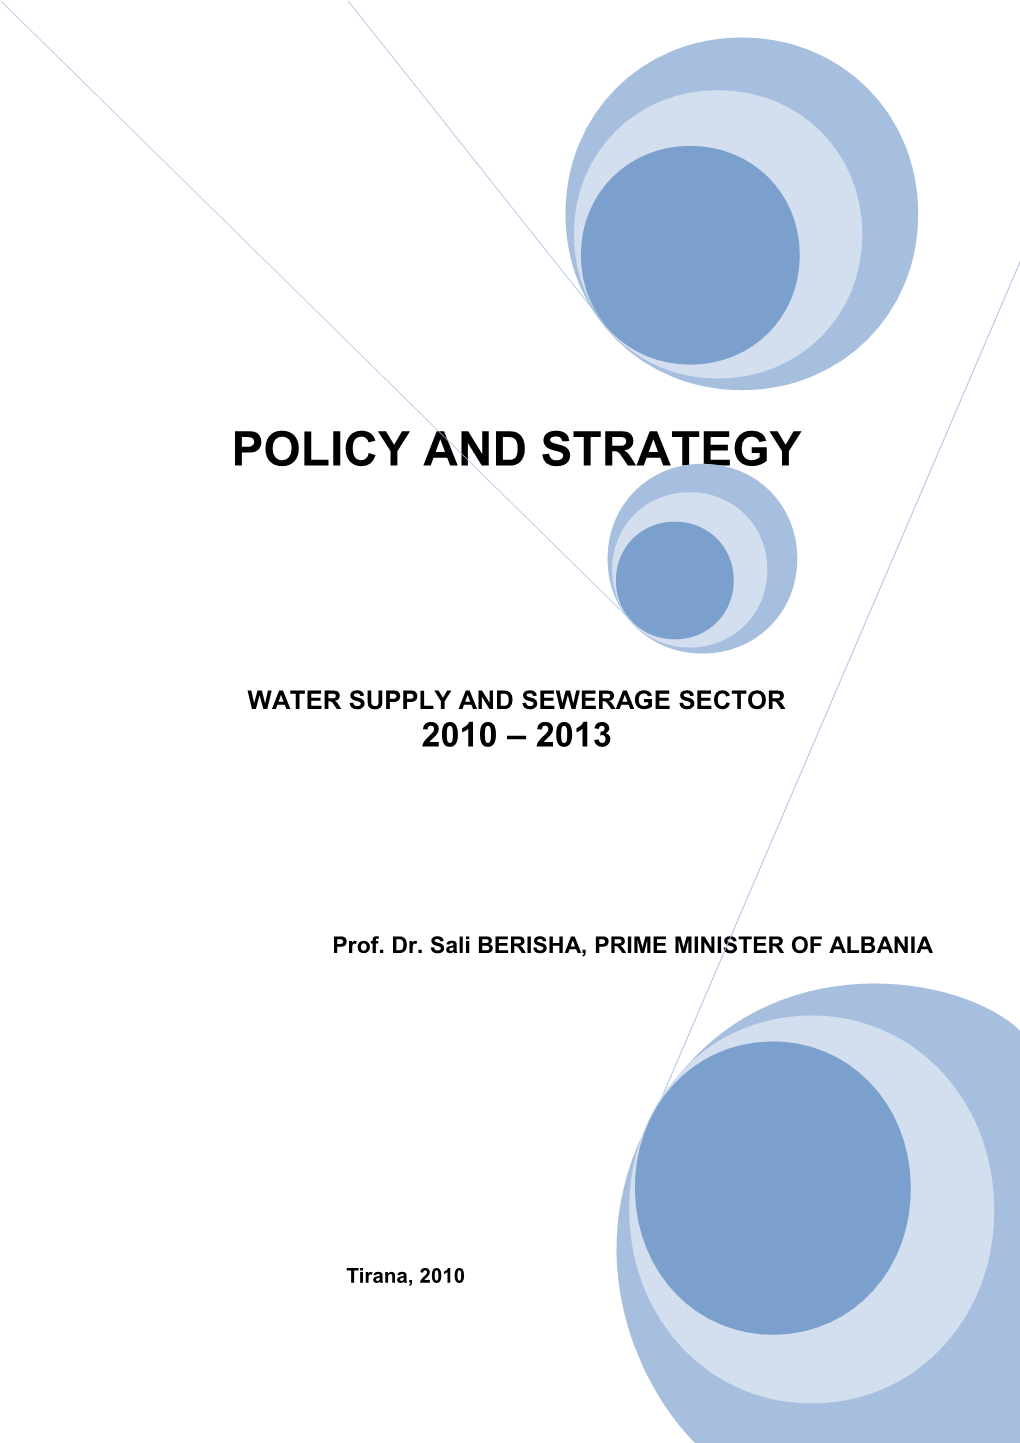 Water Supply and Sewerage Sector